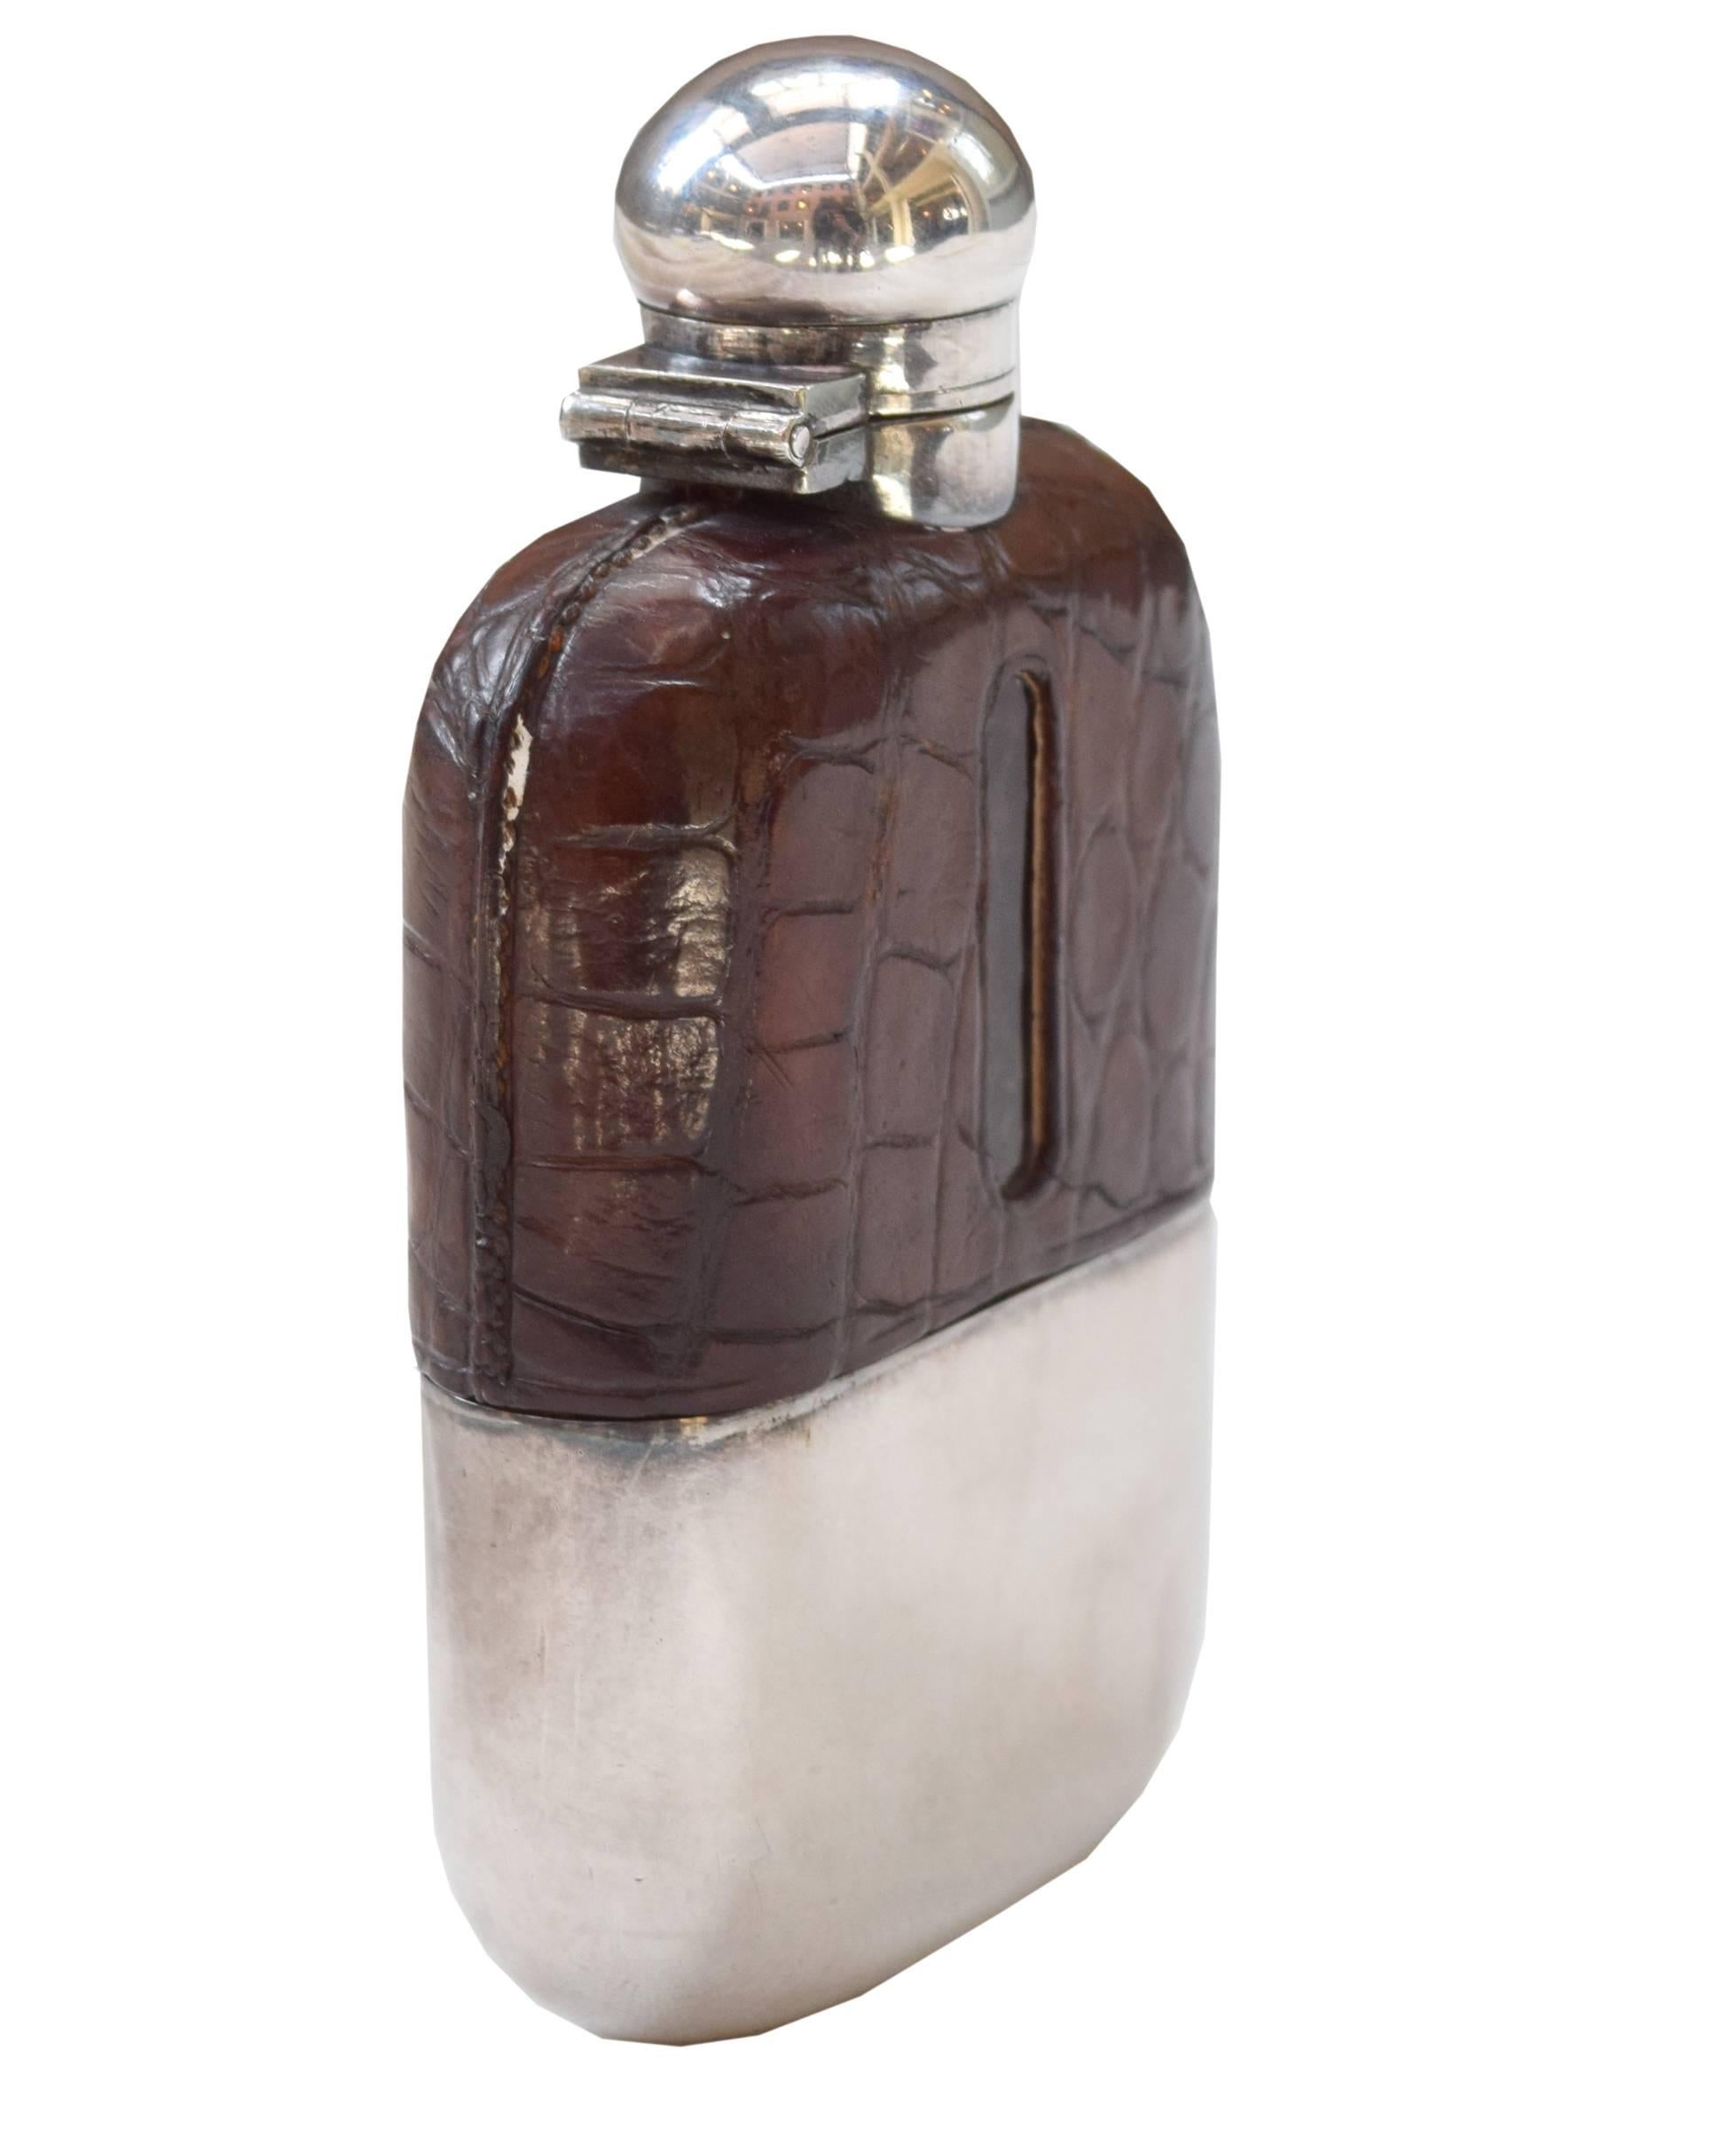 Petite ladies flask from London. This circa 1930 flask is covered in stamped leather and includes a removable silver plated drinking cup and bayonet style CAP. Originally sold by Drew and Sons, Picadilly circus.